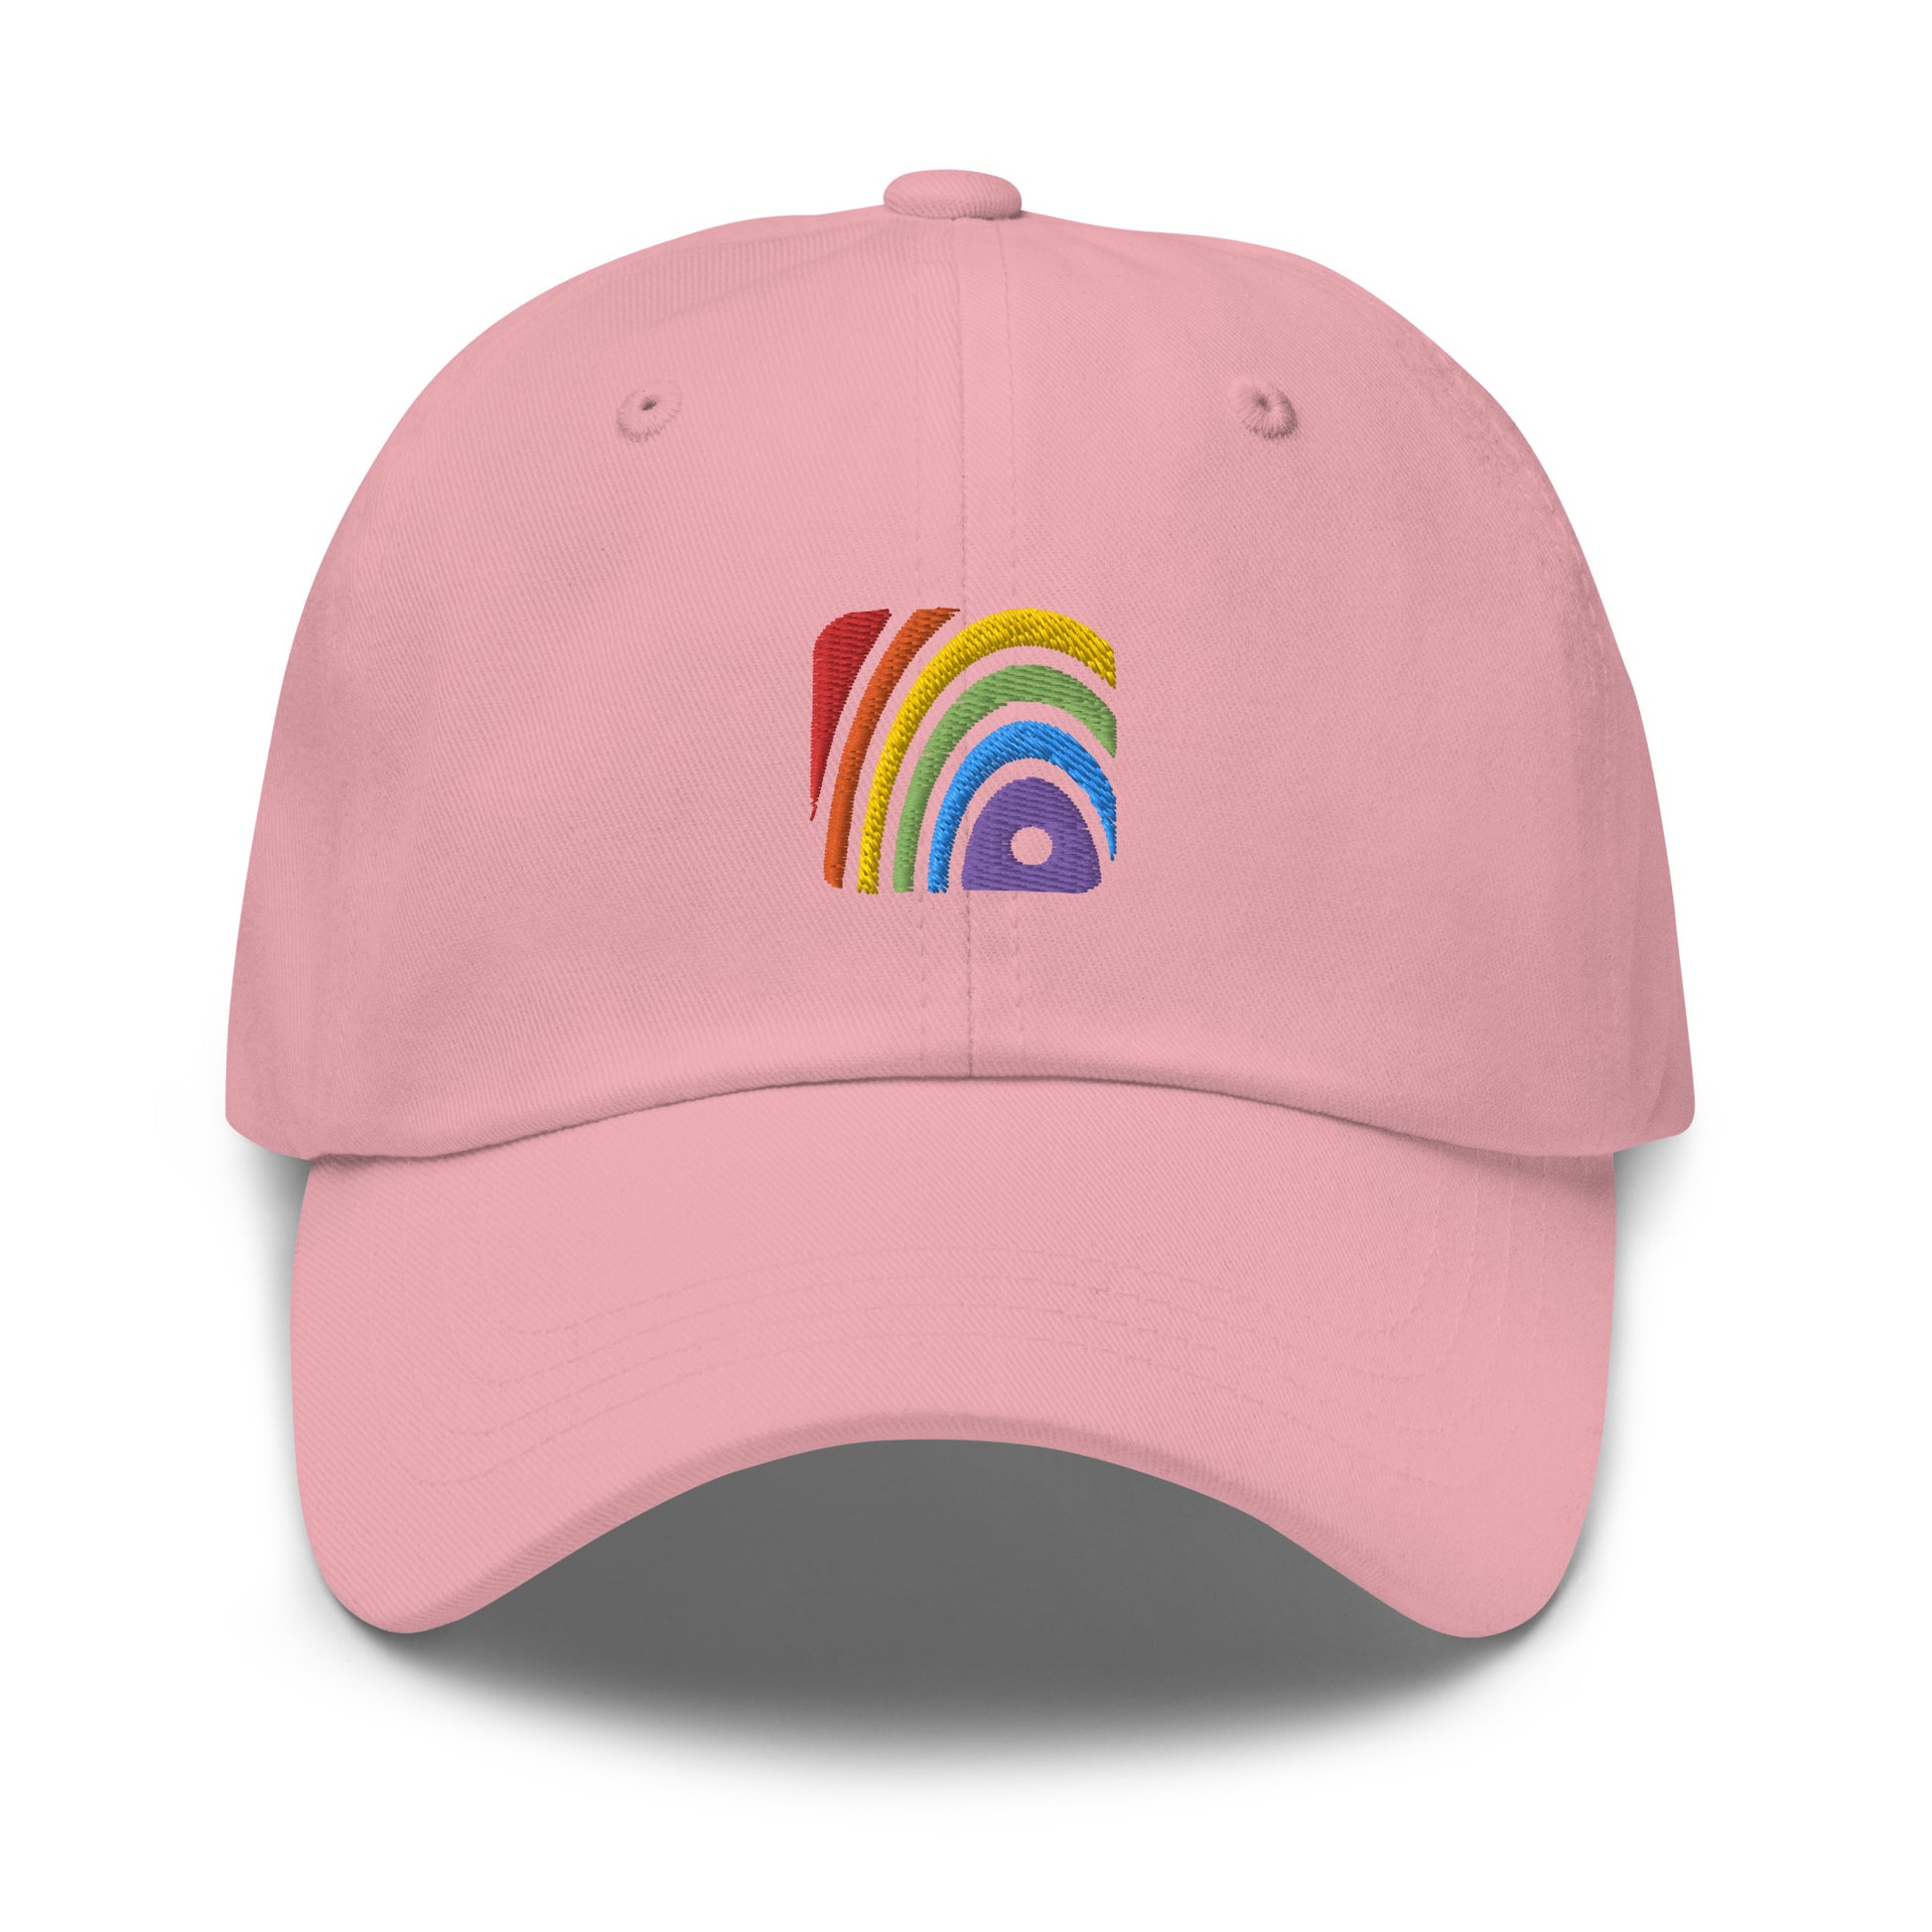 Pink baseball hat featuring rainbow design embroidery with a low profile, adjustable strap.